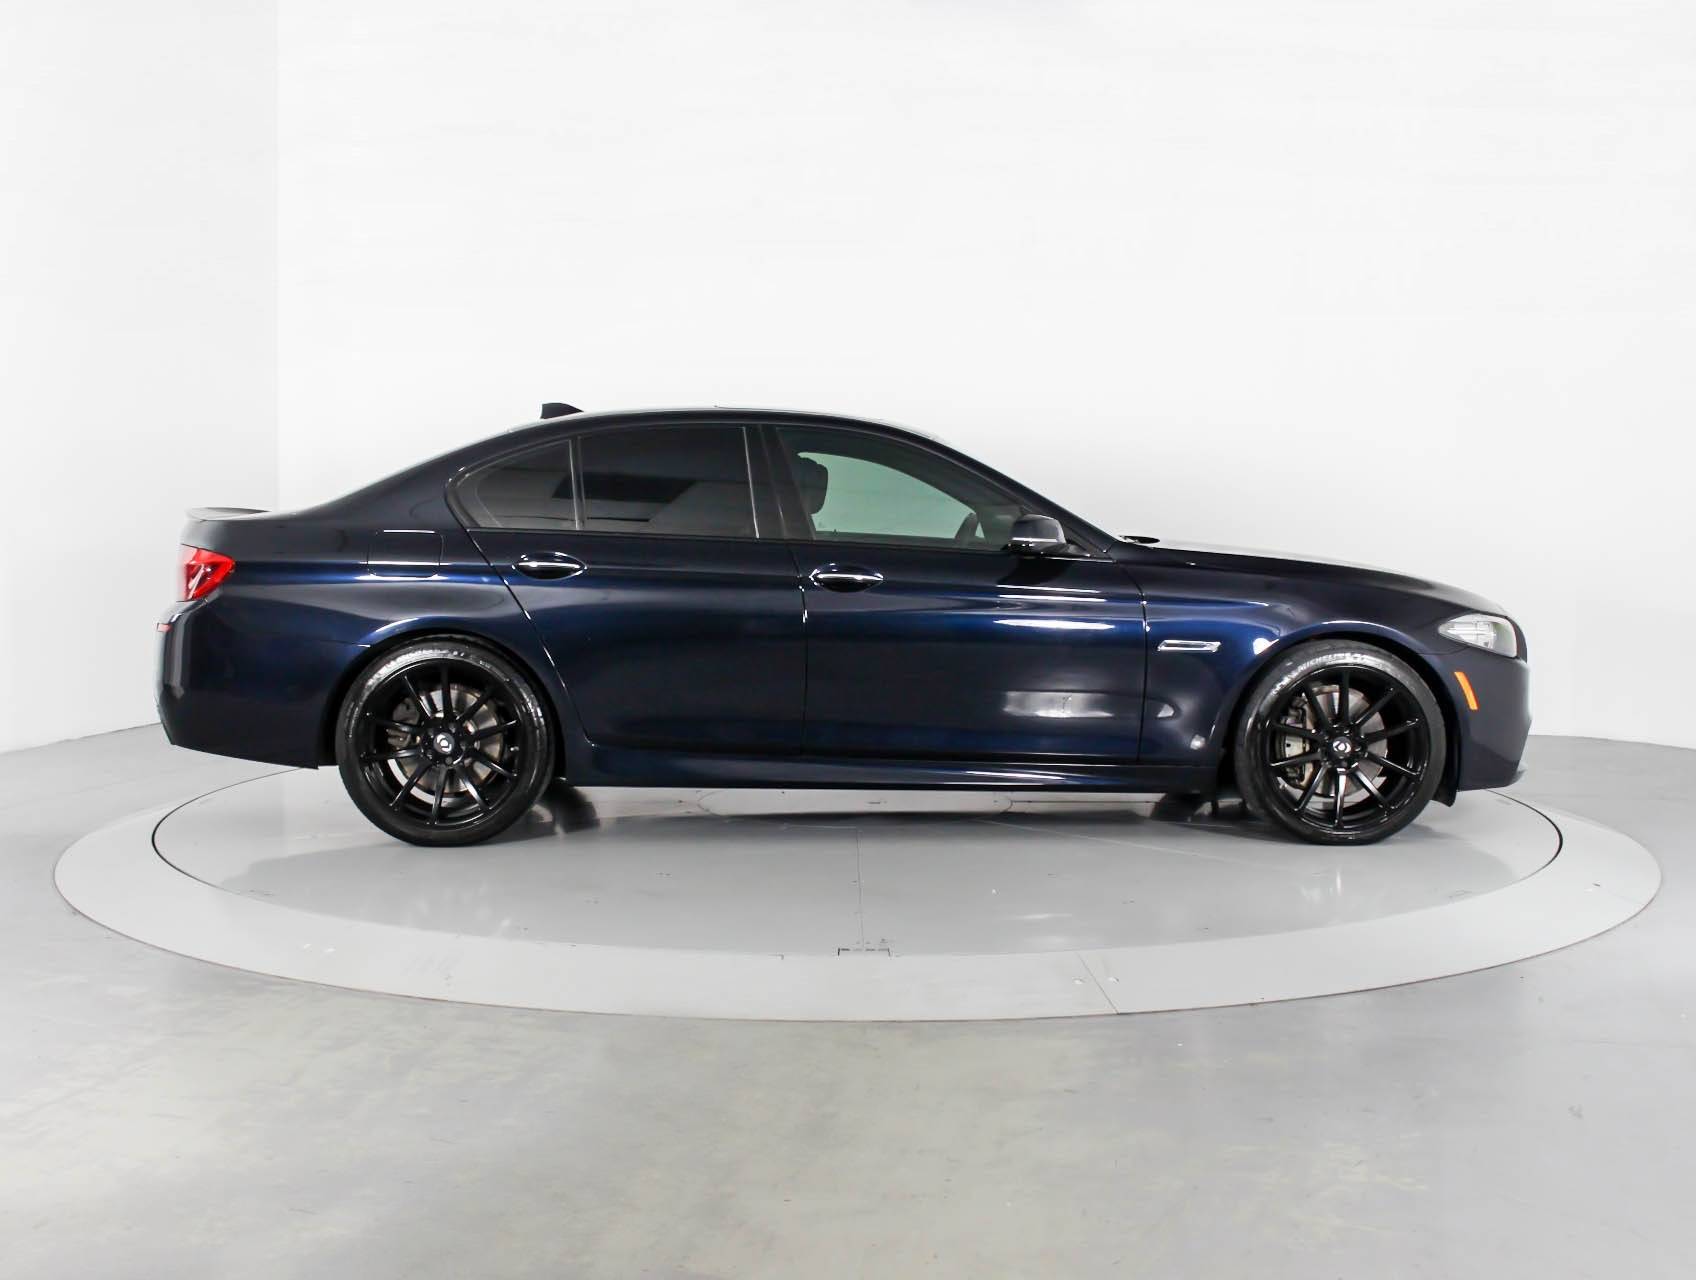 Used 2014 BMW 5 SERIES 550i M Sport for sale in WEST PALM | 89439